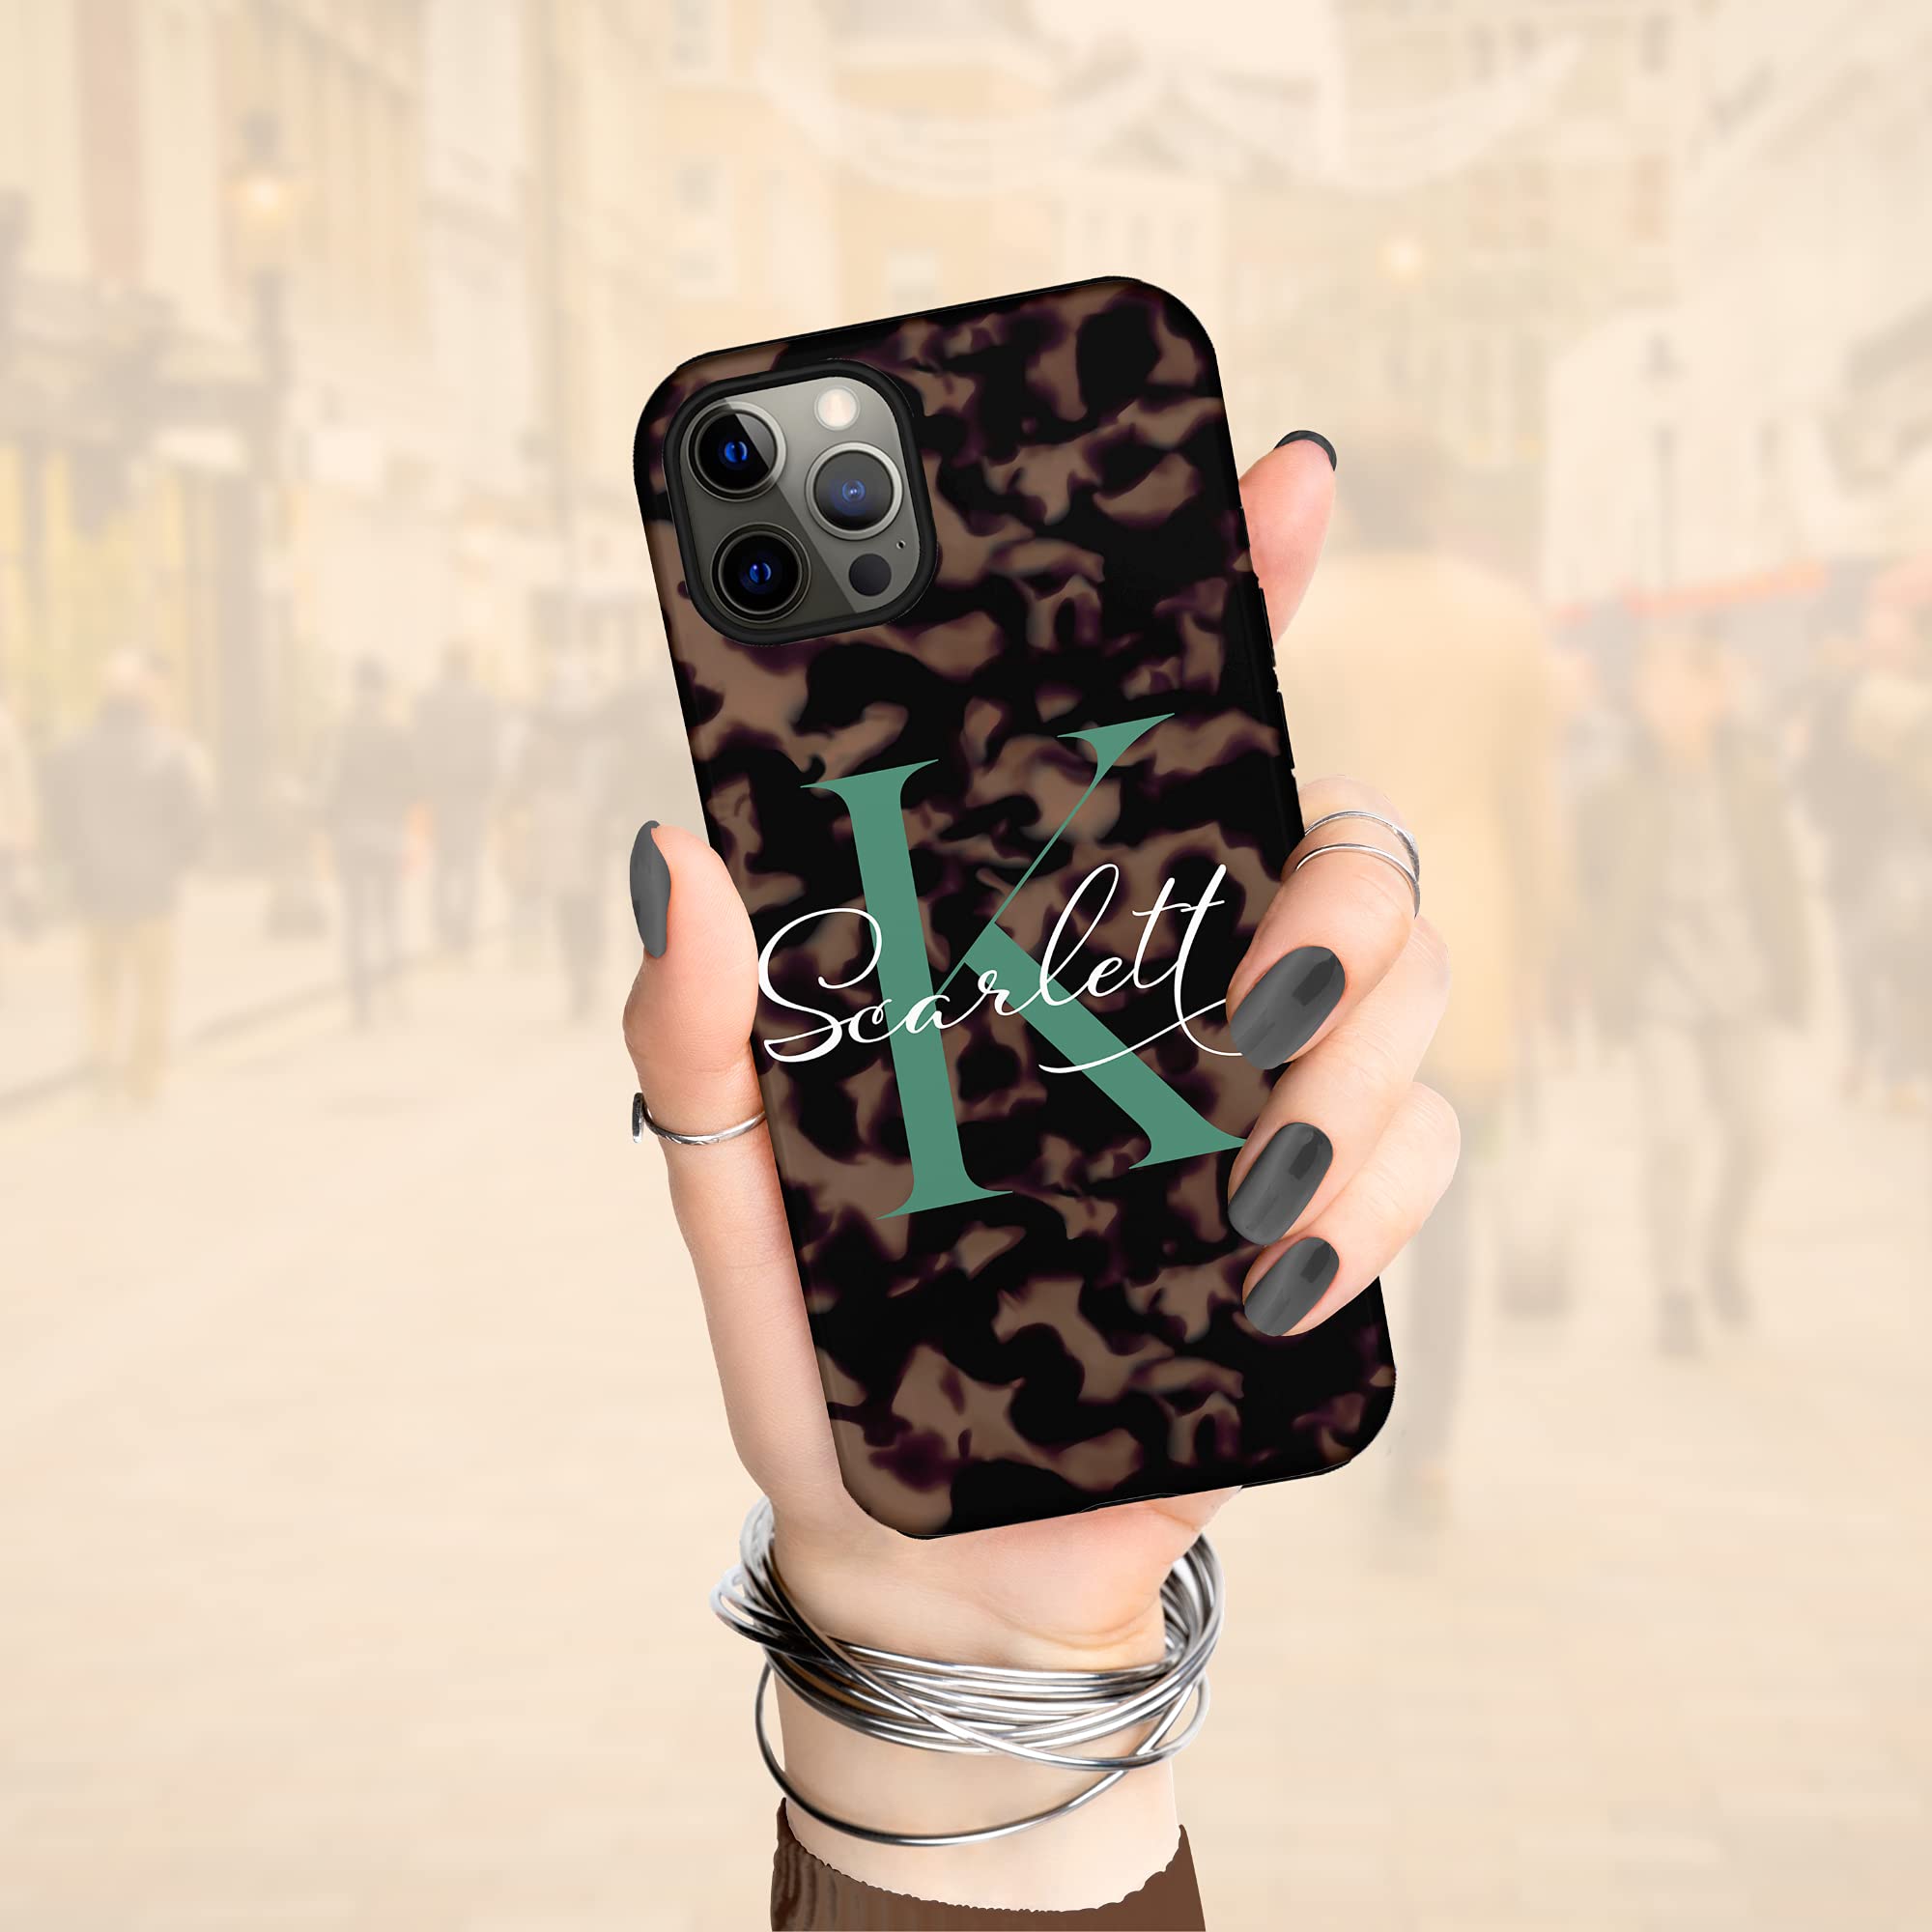 Artisticases Custom Tortoiseshell Monogram Initial Case, Personalized Name Case, Designed for iPhone 14 Plus, iPhone 13 Pro Max, iPhone 12 Mini, iPhone 11, iPhone X/XS Max, iPhone ‎XR, iPhone 7/8‎